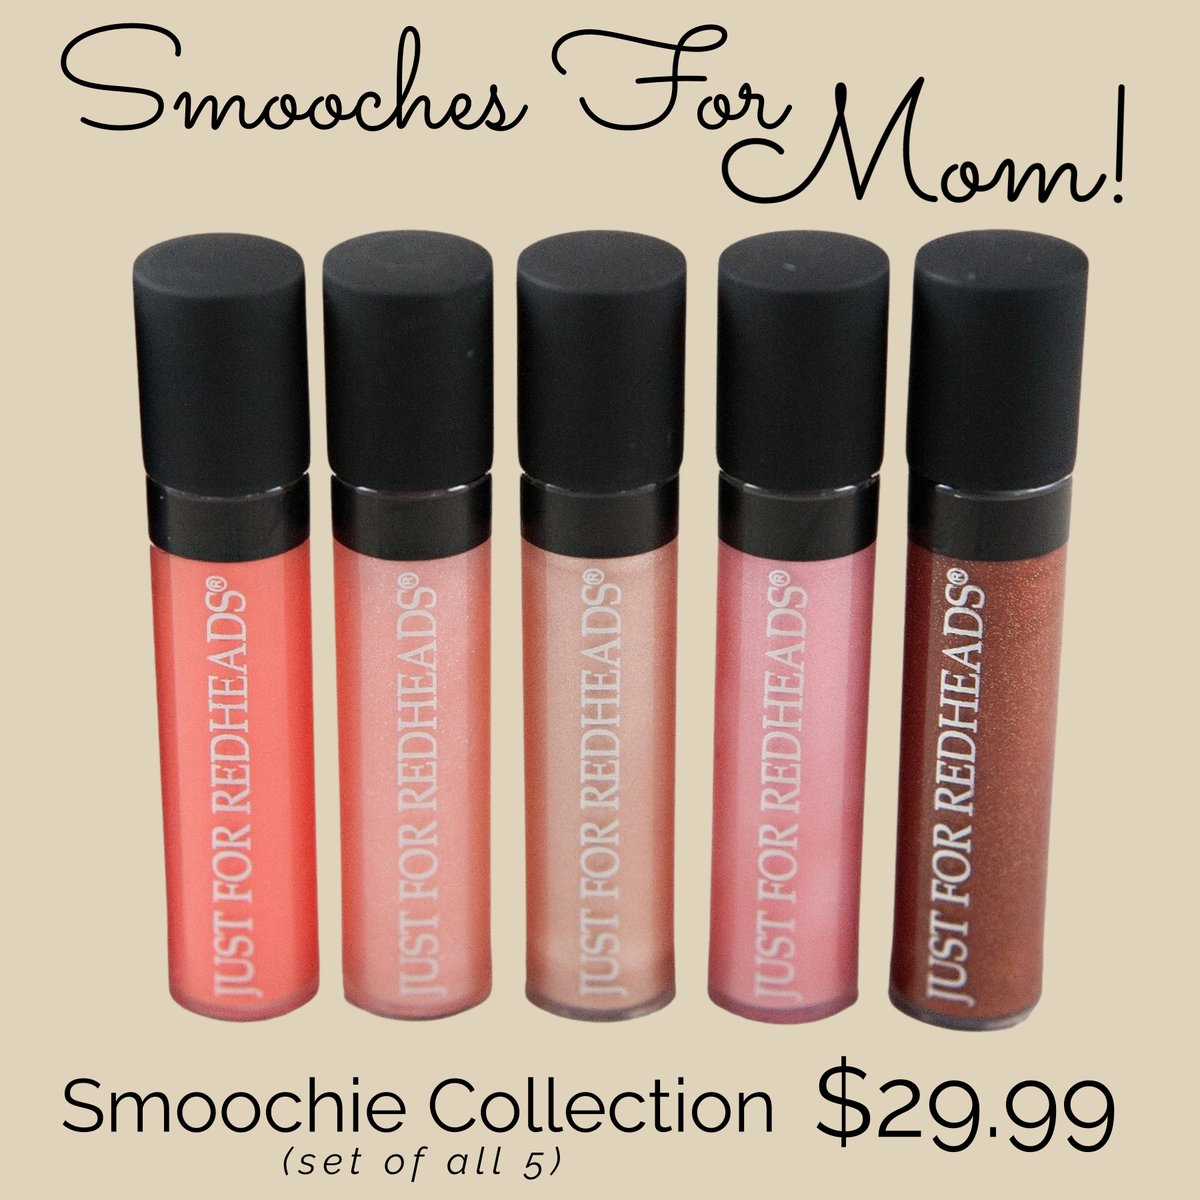 Smooches for Mom!
Treat Mom with the best Smooches and give her JFR’s Smoochie Collection!
Get the entire collection here ↓↓↓
justforredheads.com/smoochie-colle…
#mothersday #treatmom #redheadmoms #giftofselfcare #giftformom #smooches
#redhead #naturalredhead #redheads #redheadgirl